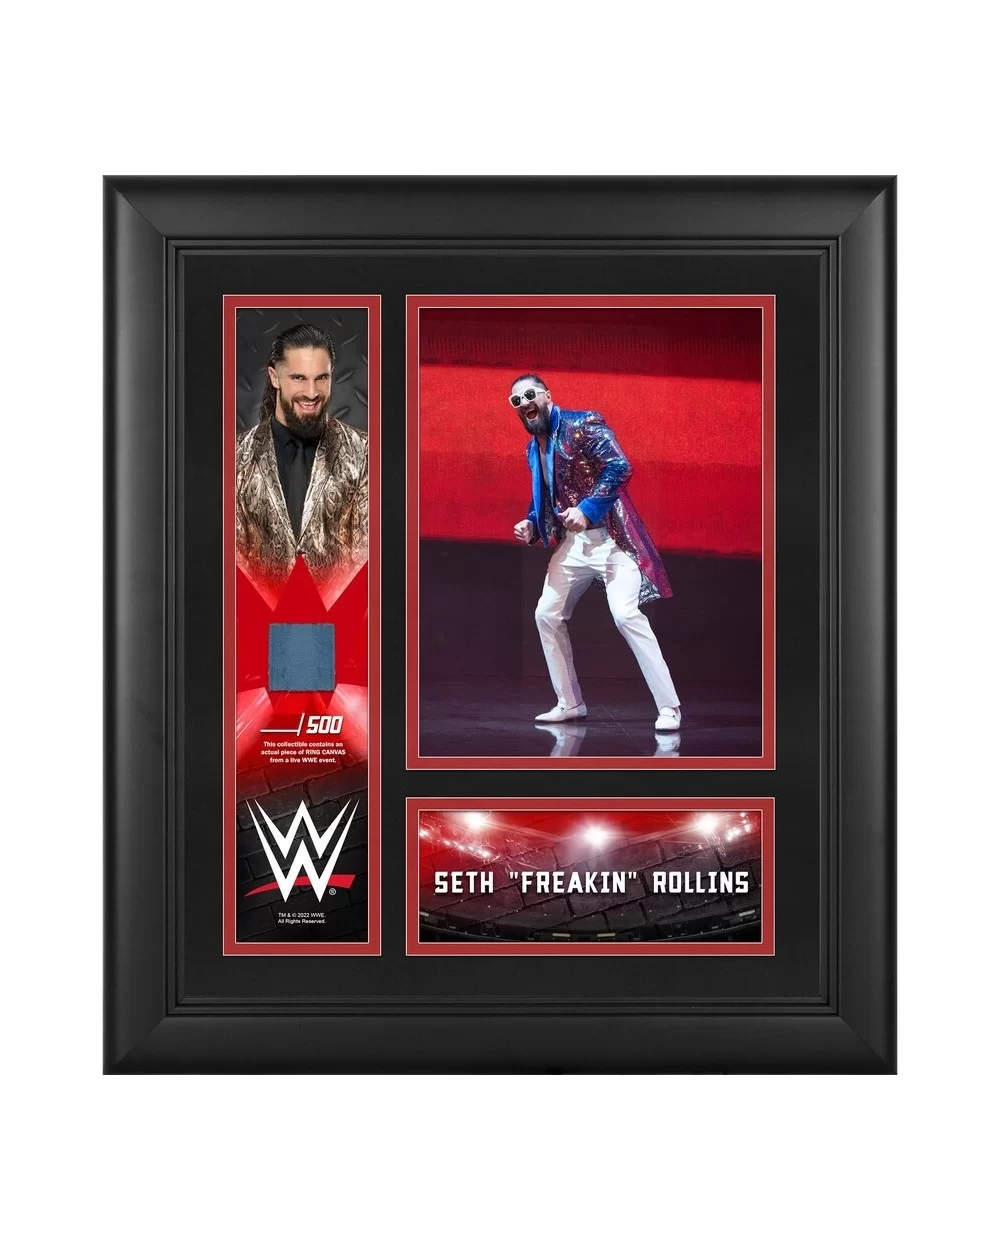 Seth "Freakin" Rollins Framed 15" x 17" Collage with a Piece of Match-Used Canvas - Limited Edition of 500 $24.64 Home & Office